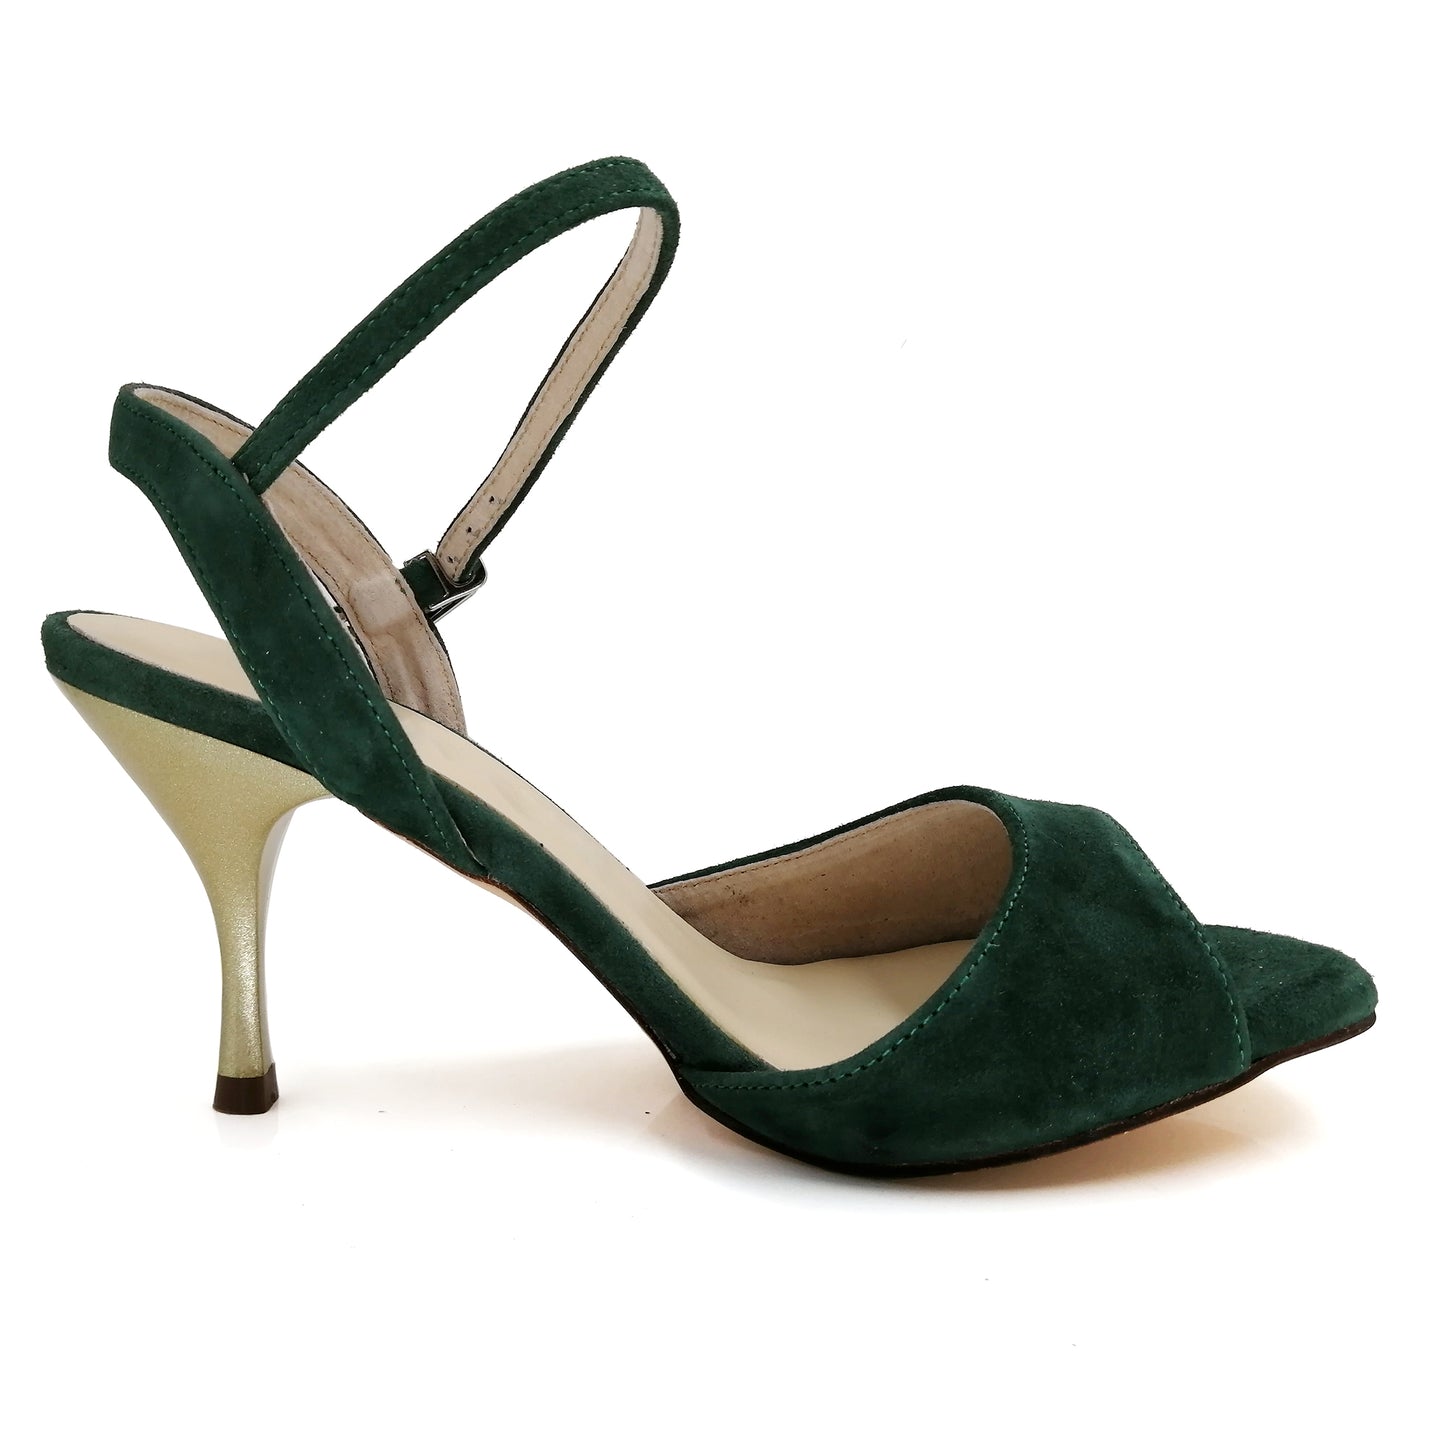 Elegant Pro Dancer Ladies Tango Shoes with High Heel and Leather Sole in Dark Green5